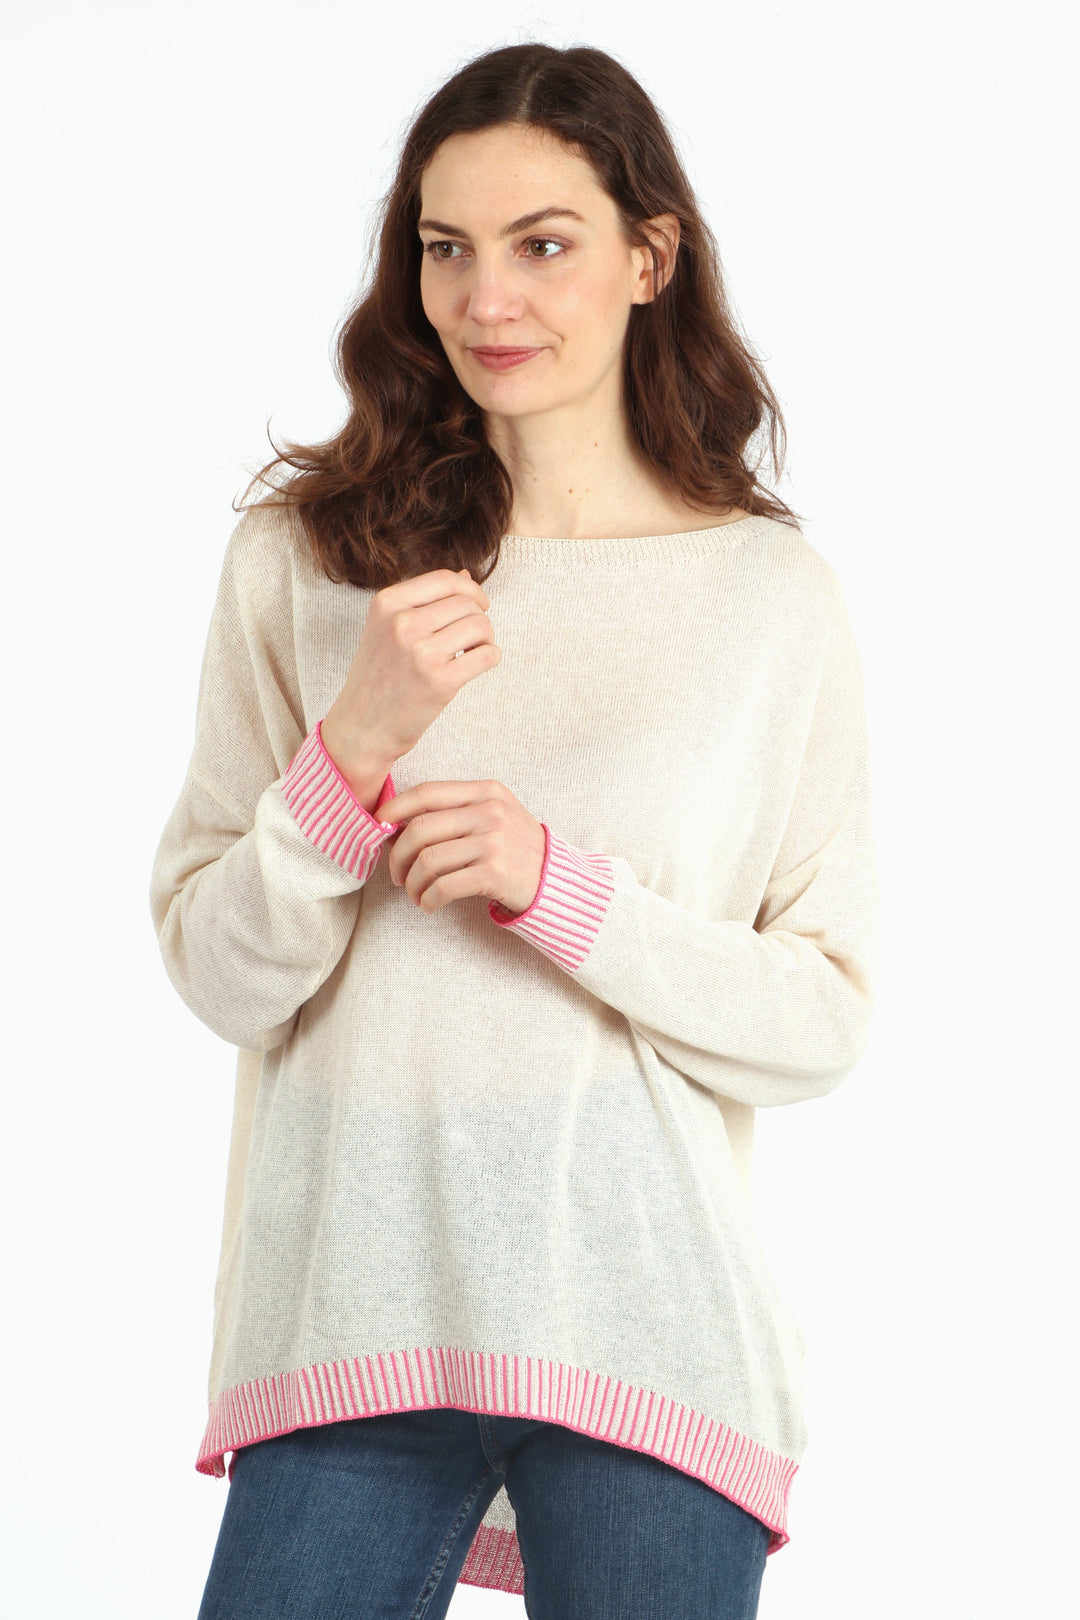 model wearing a long sleeved cotton jumper in cream with a contrasting pink stitched hem and cuff